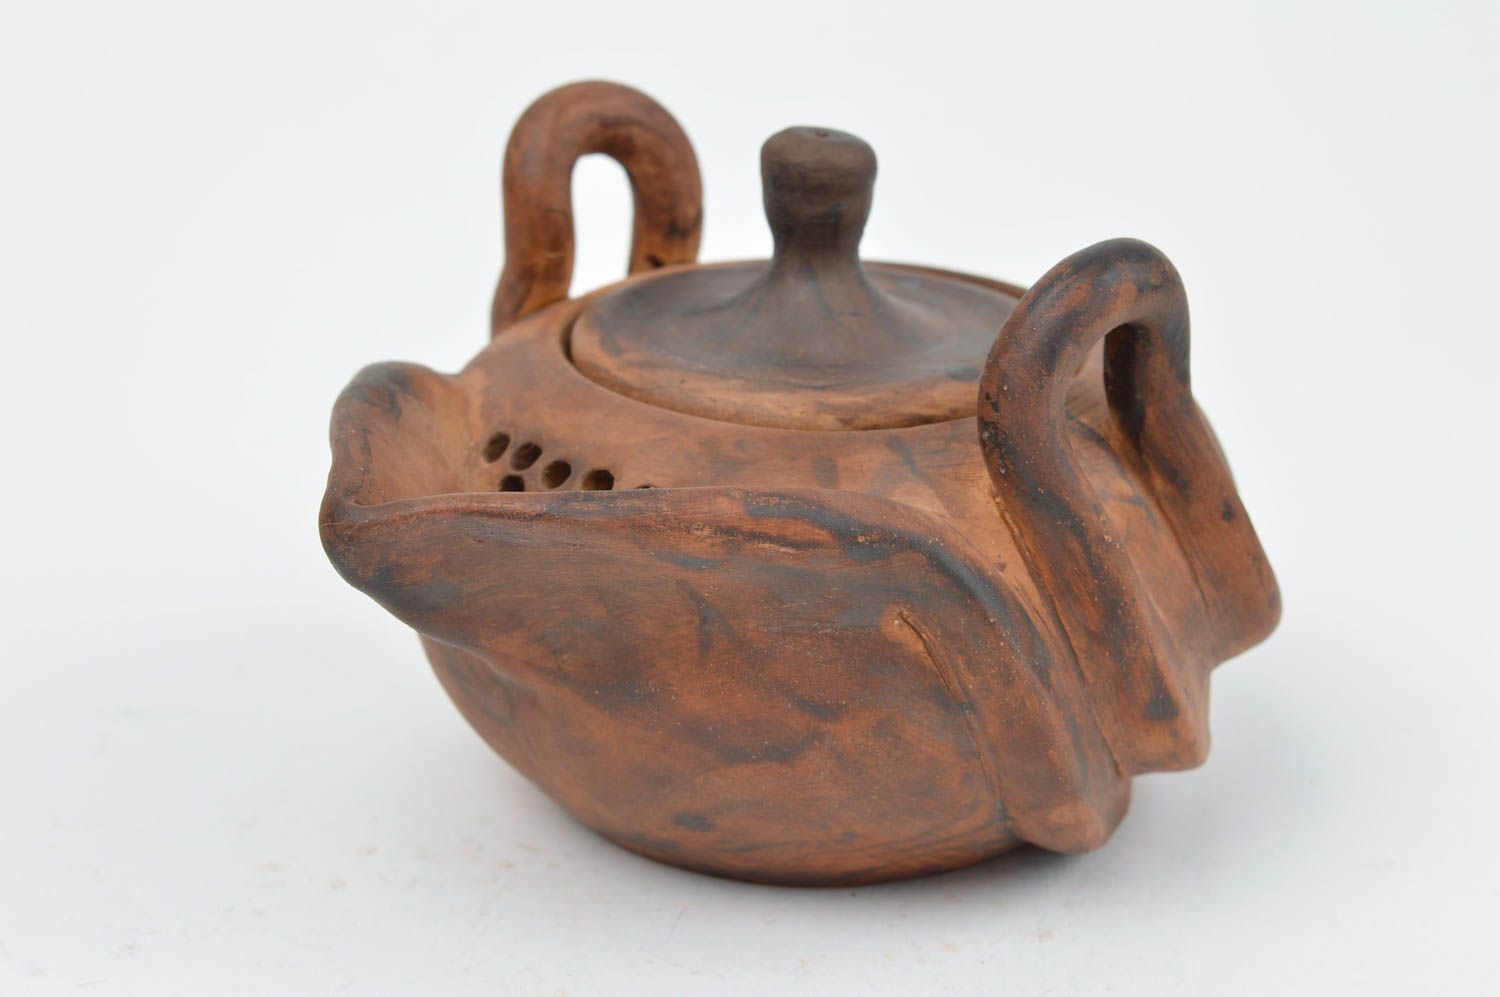 Unusual shaped handmade ceramic teapot clay teapot designs collectible item photo 2